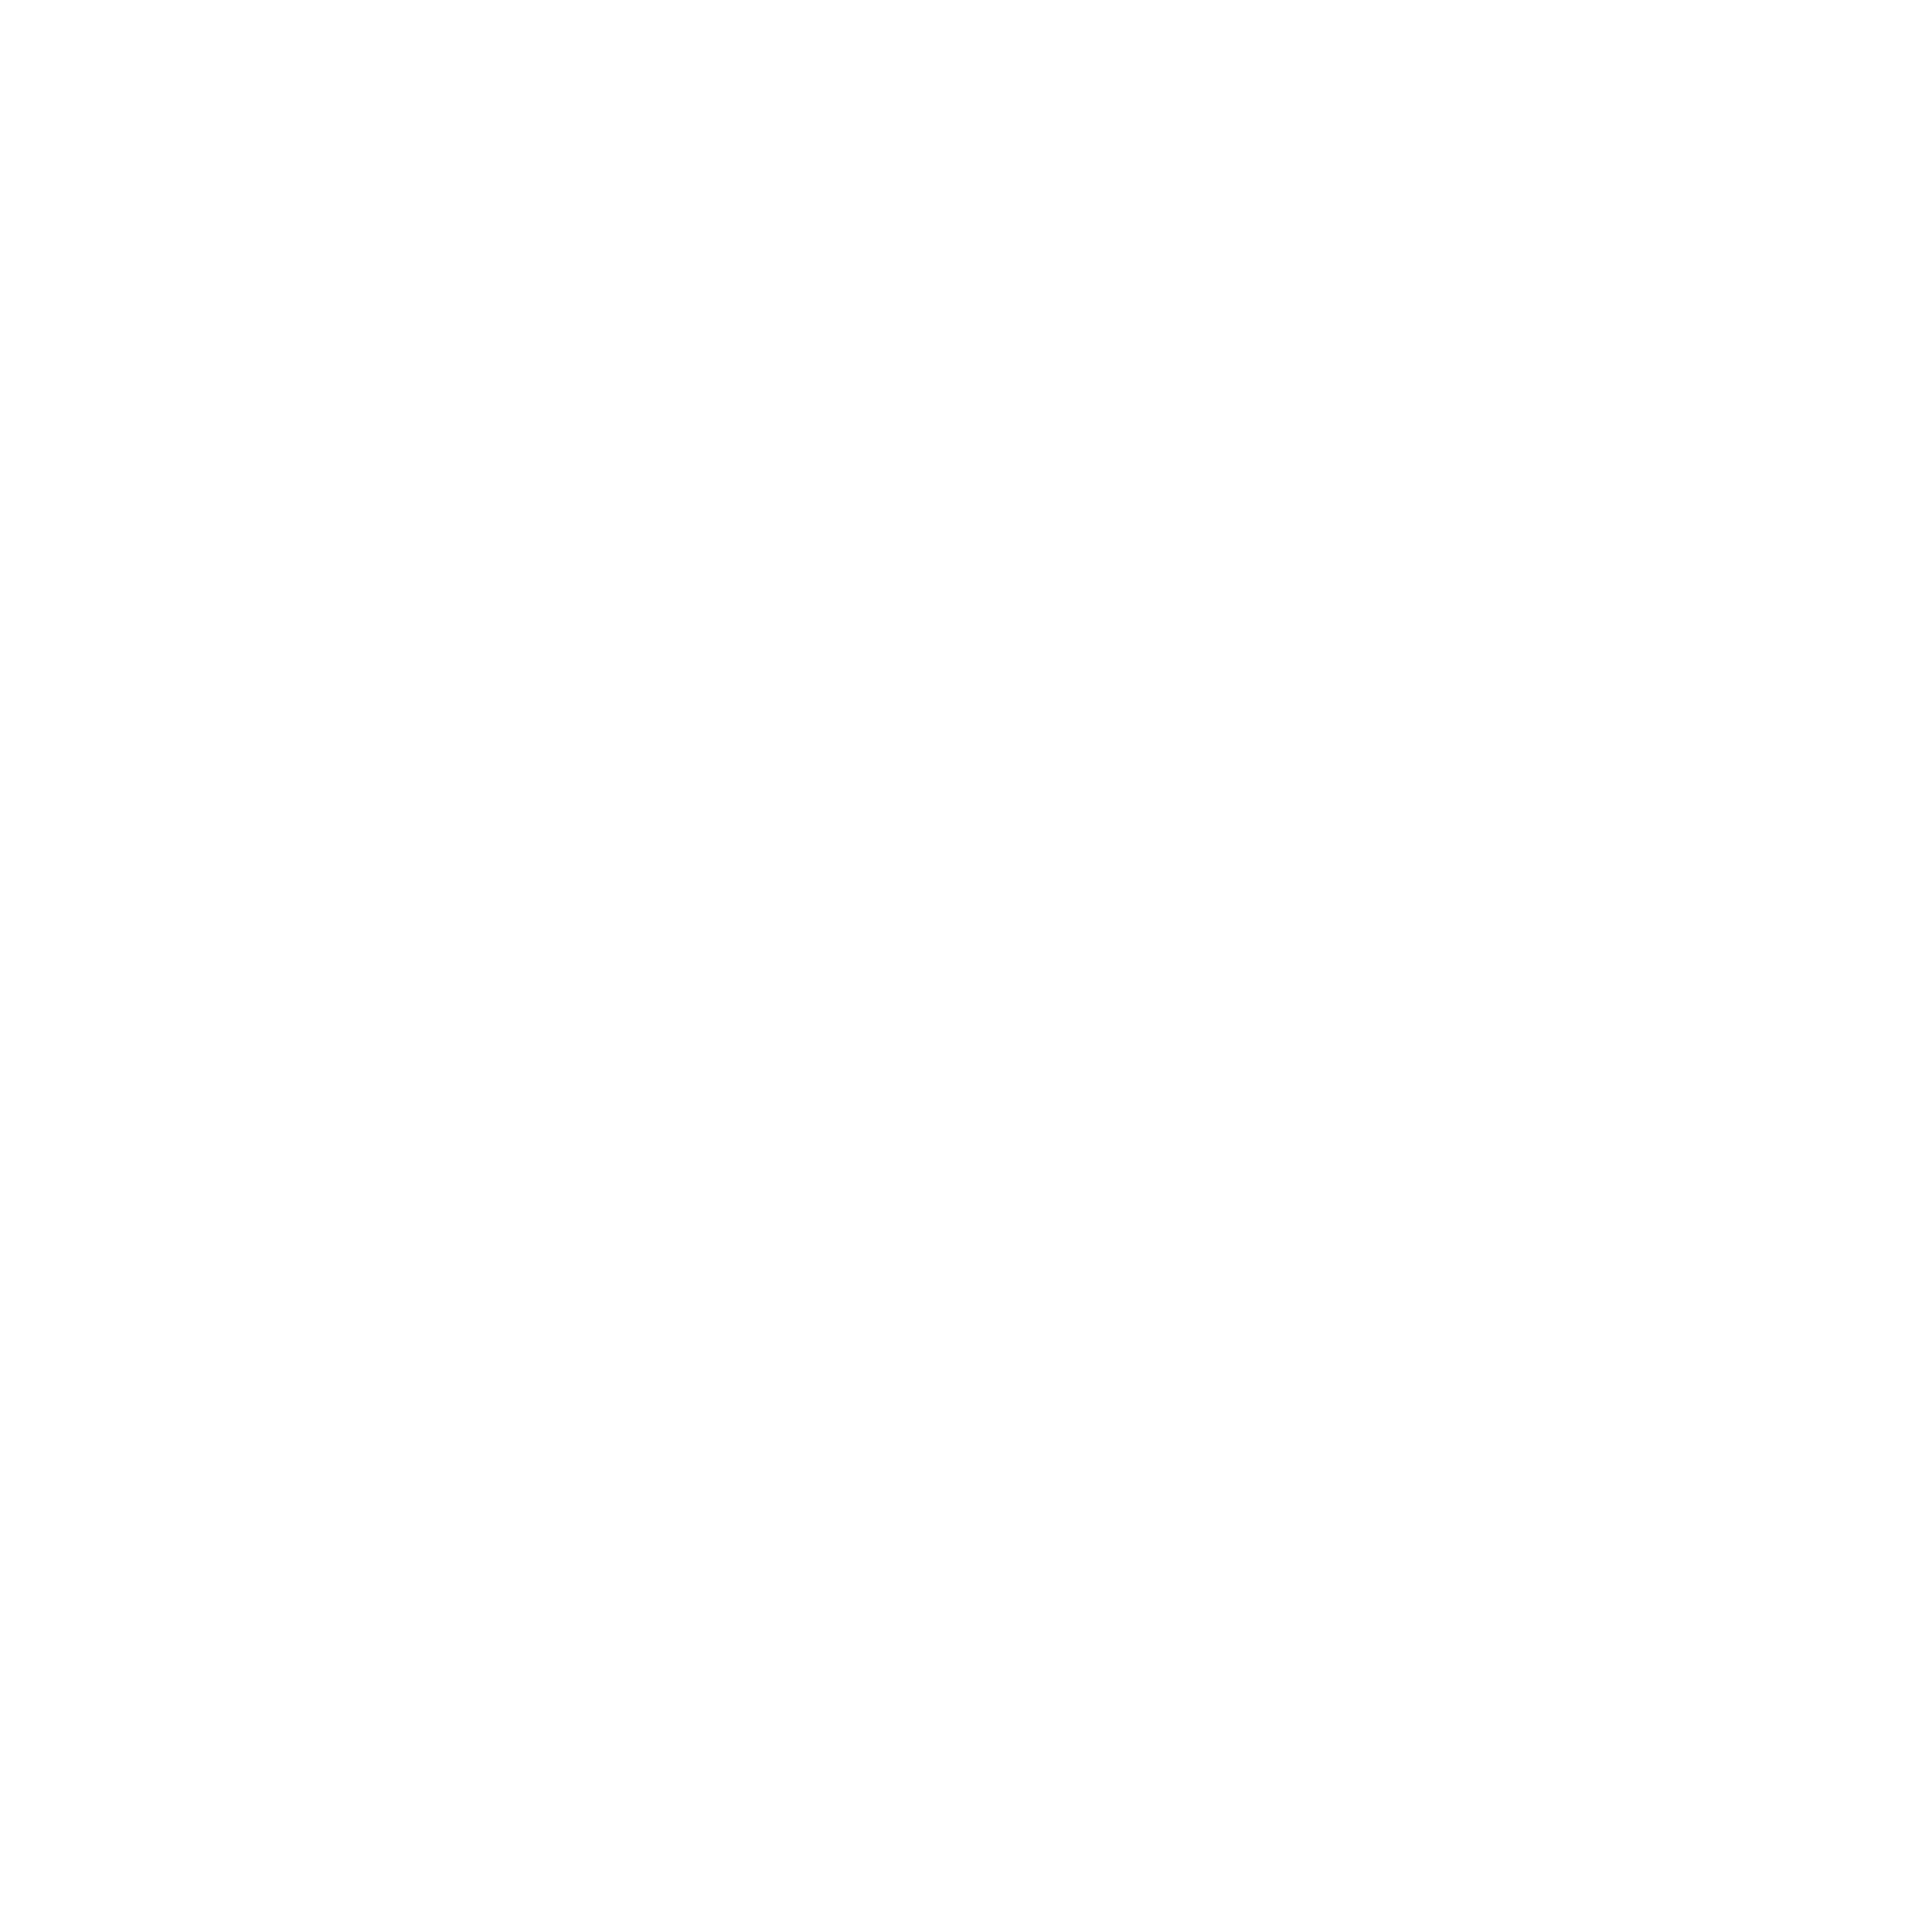 The Antler Inc